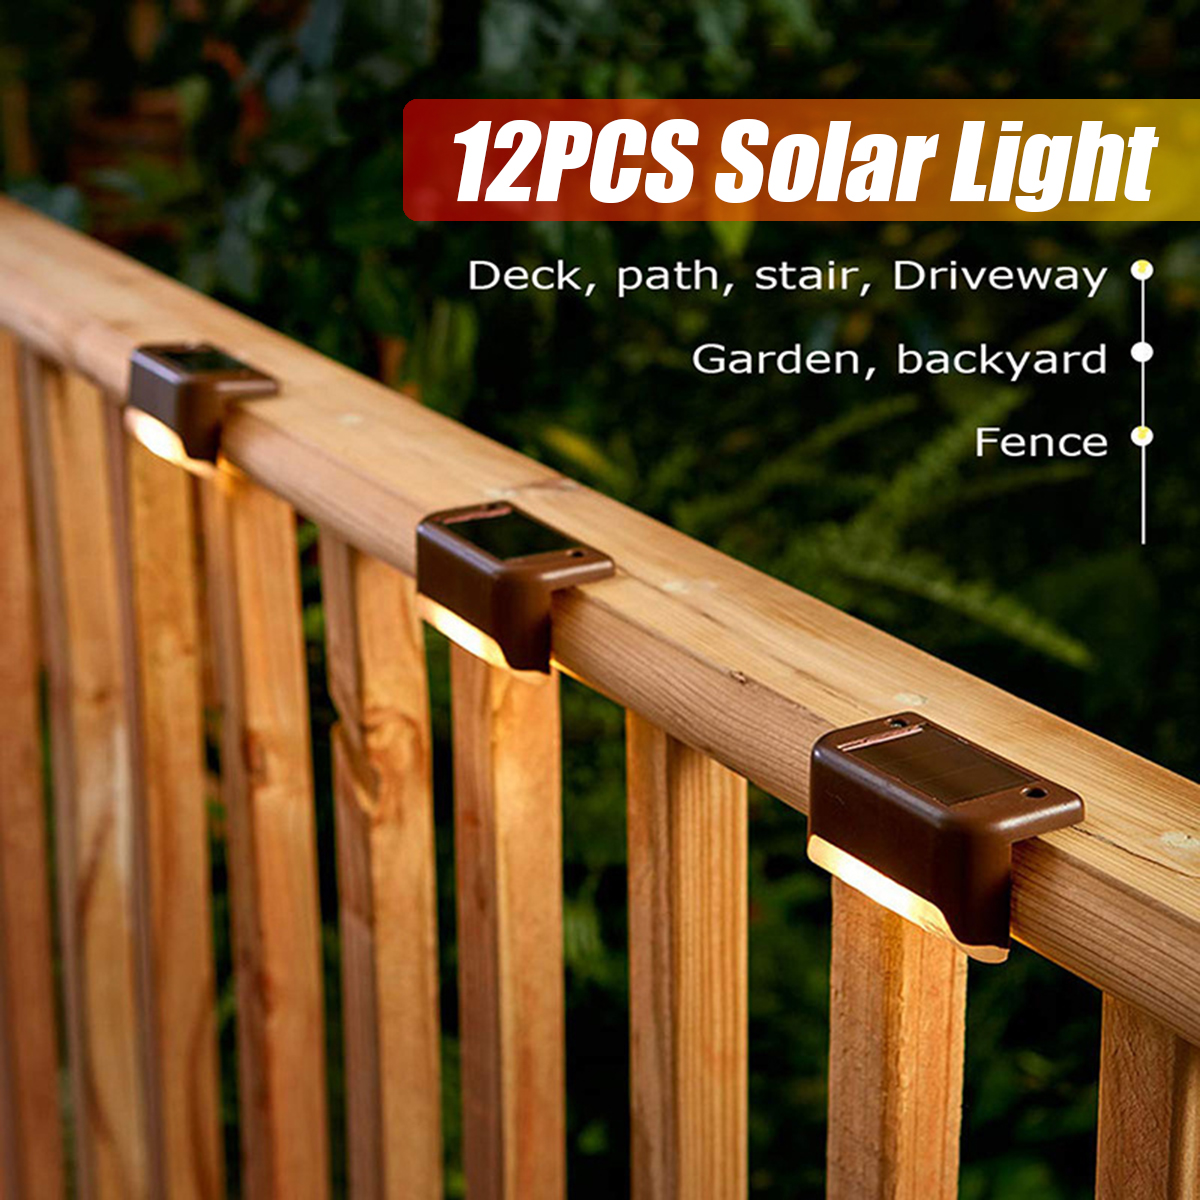 12PCS-Solar-Powered-LED-Stairs-Step-Fence-Lights-Deck-Bed-Outdoor-Path-1689908-4